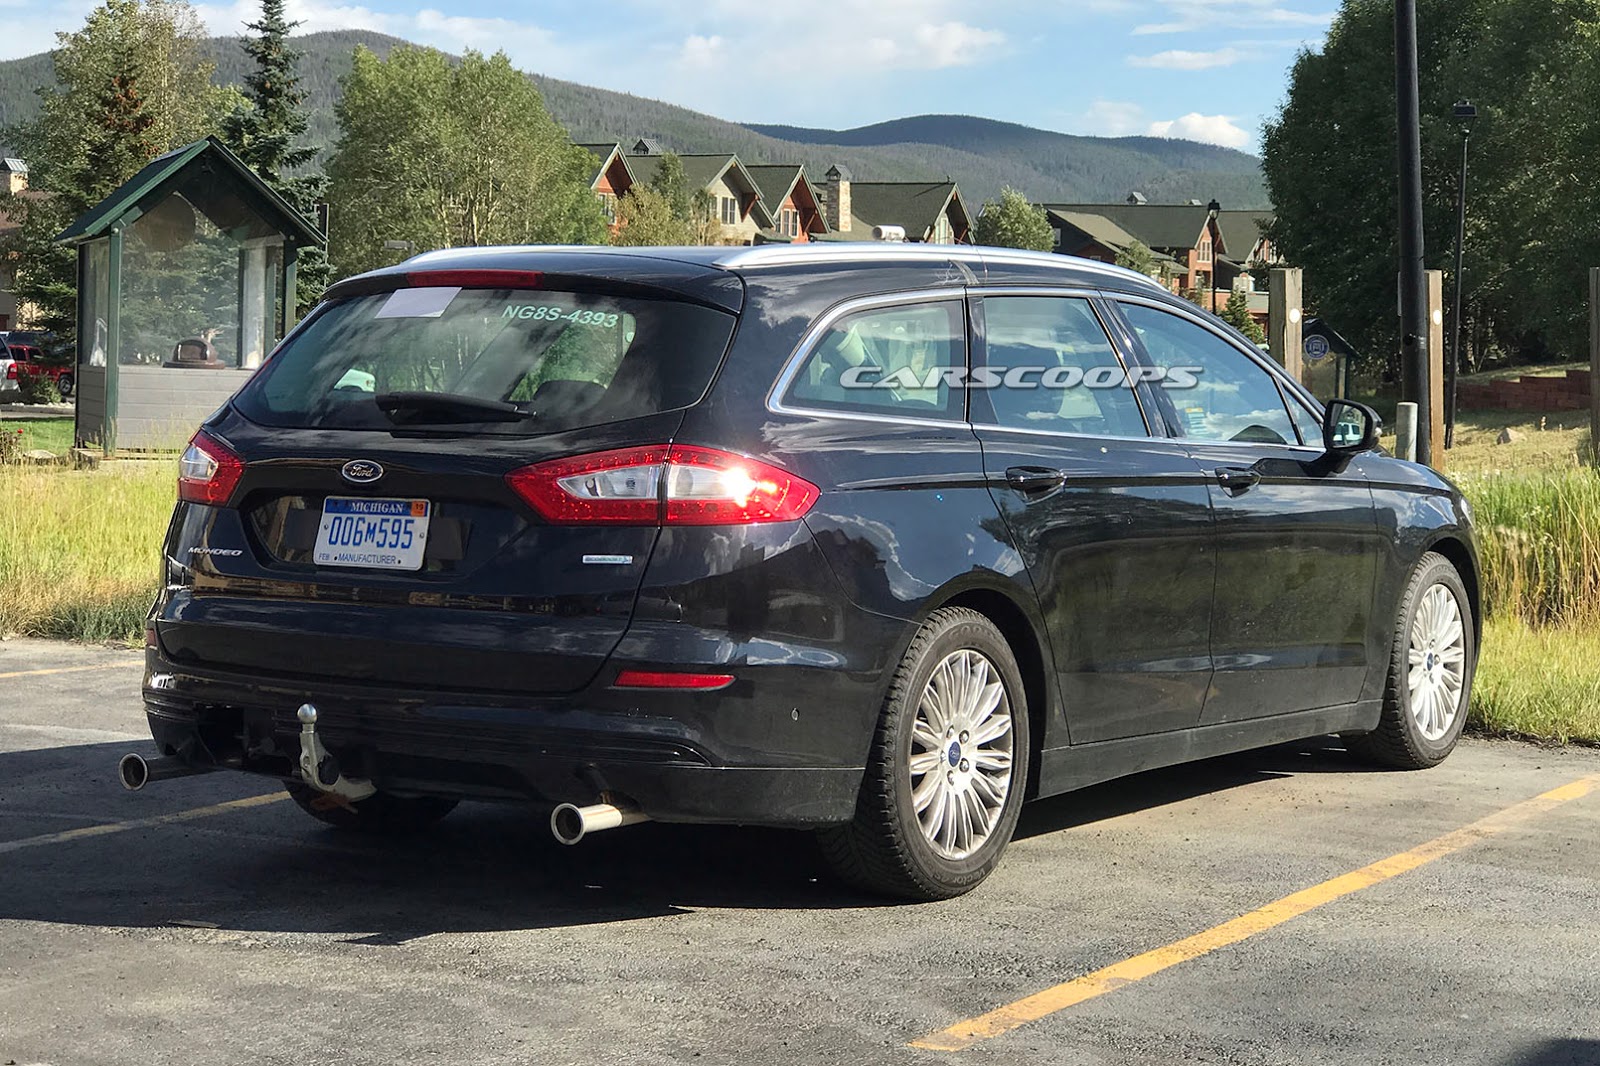 schermutseling overloop gemeenschap What's Ford Doing Testing A Fusion (Mondeo) Station Wagon On U.S. Soil? |  Carscoops